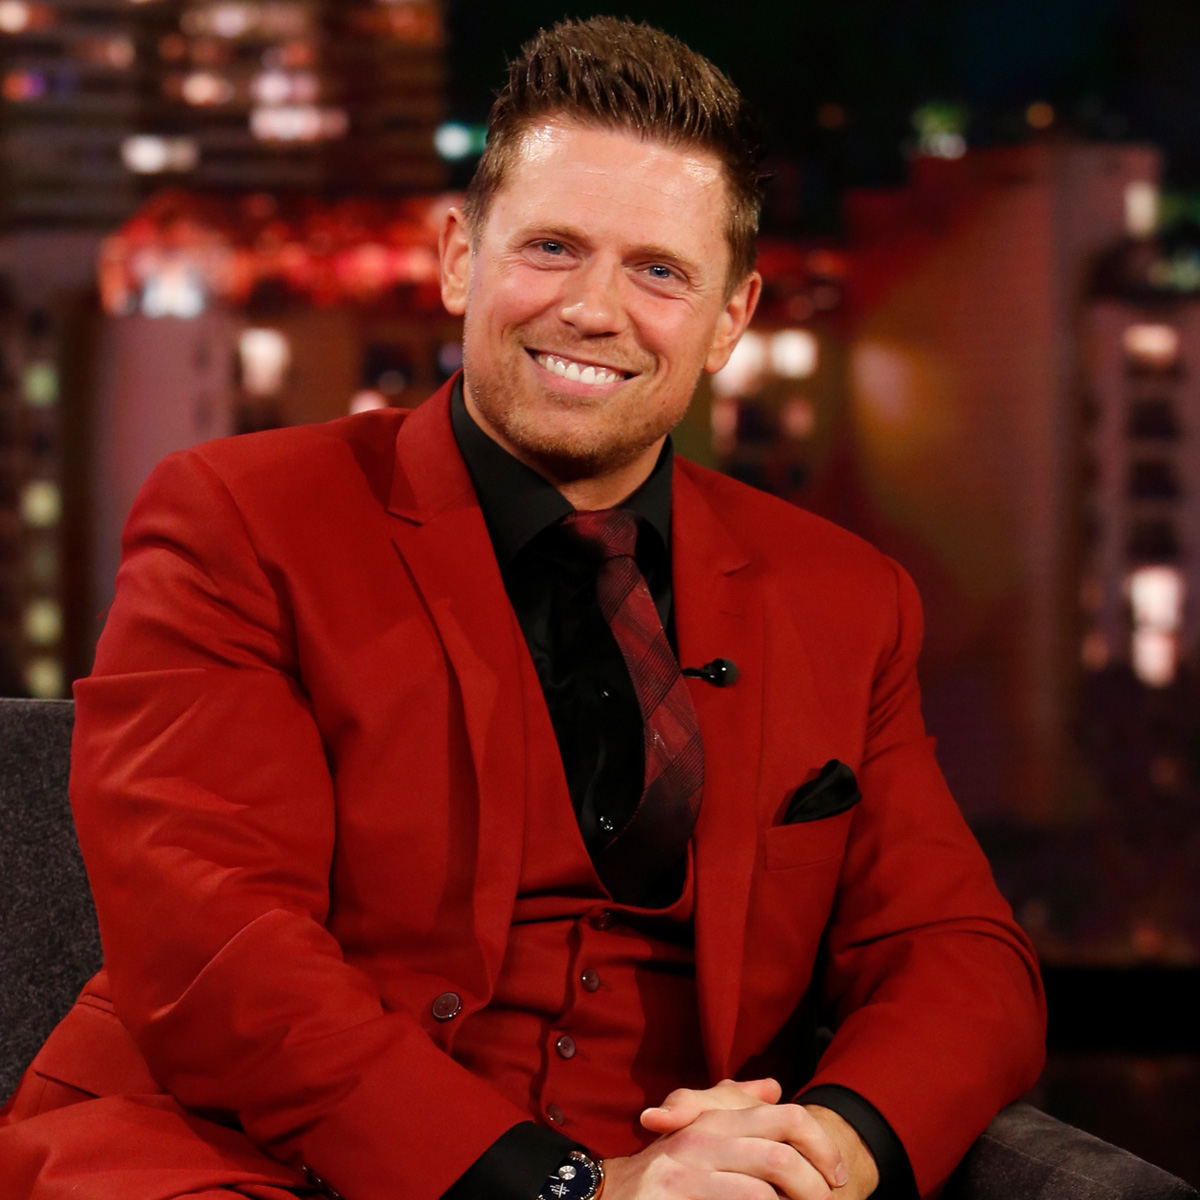 MLB All-Star Game: Mike 'The Miz' Mizanin is a one man traveling show 